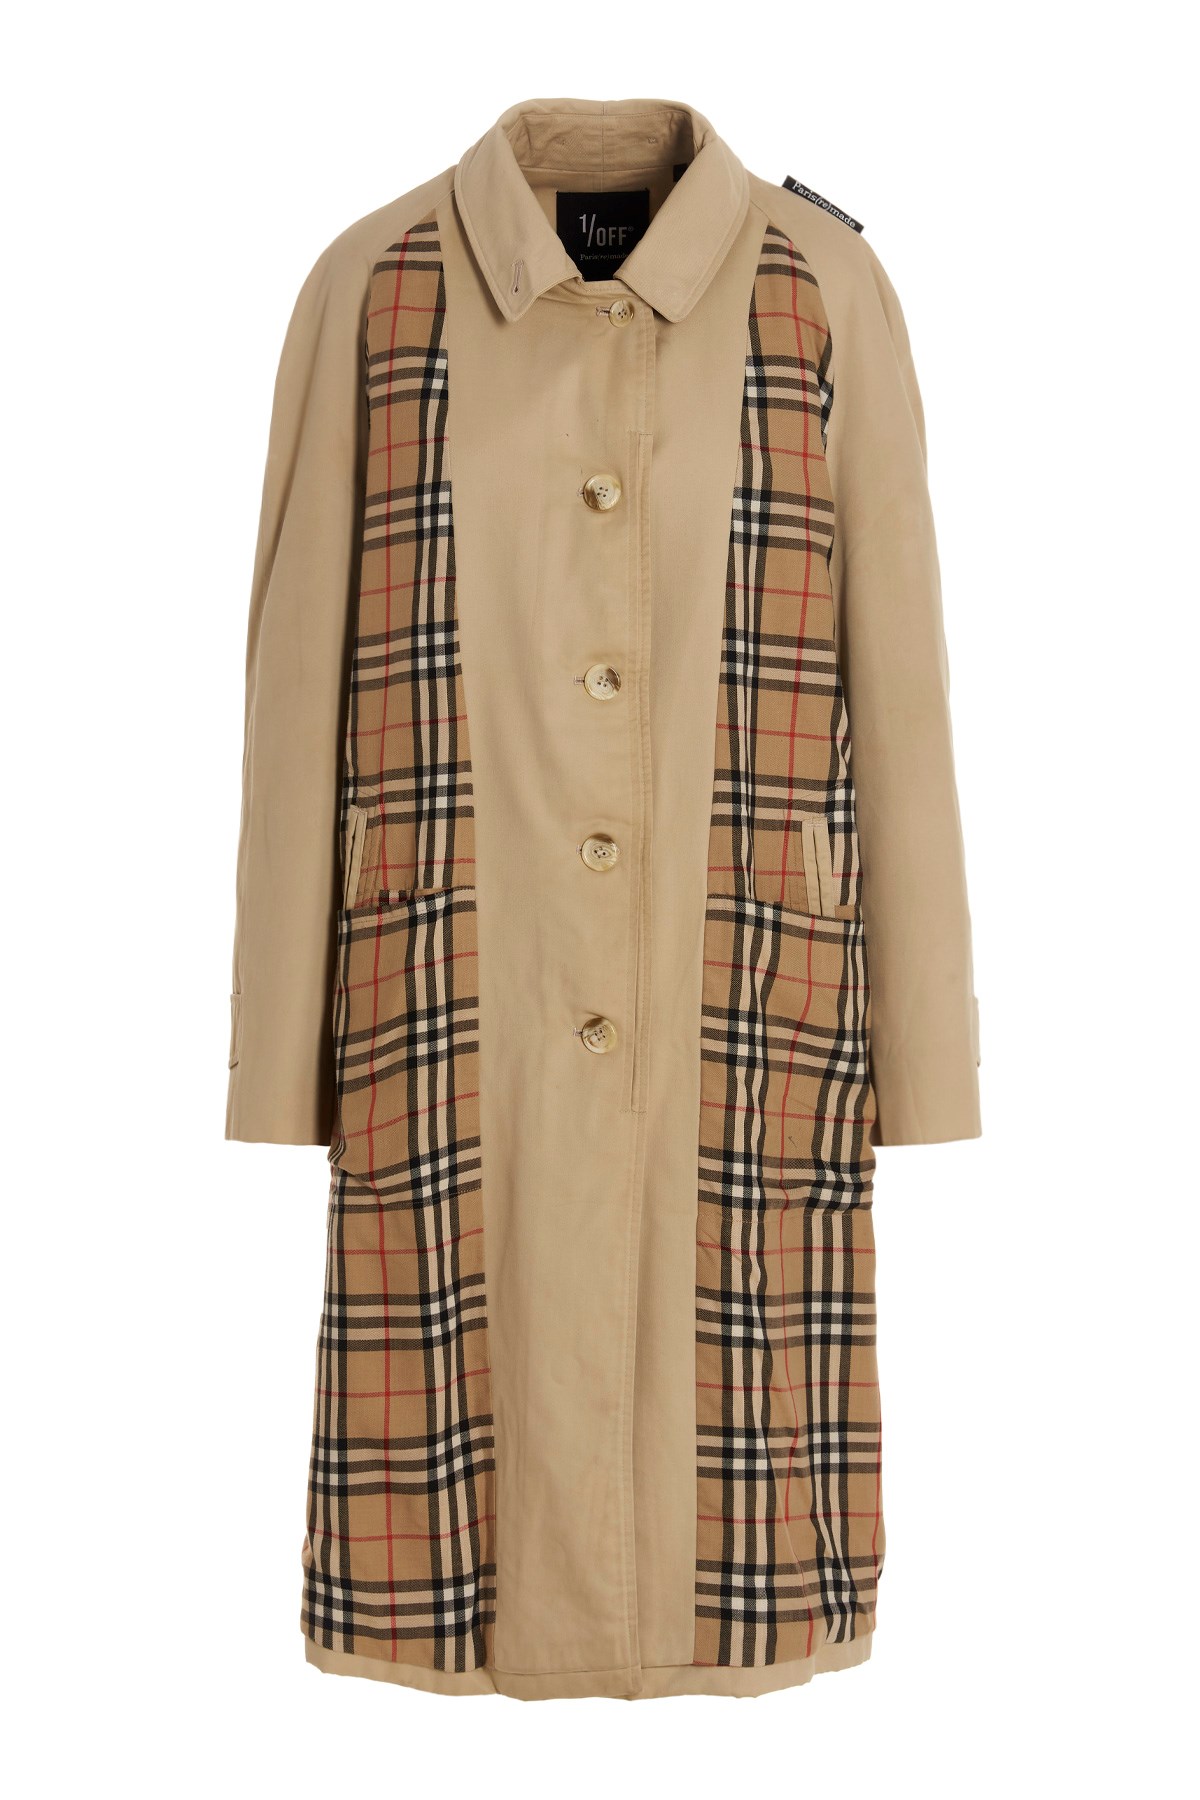 1/OFF 'Inside Out Burberry’ Trench Coat